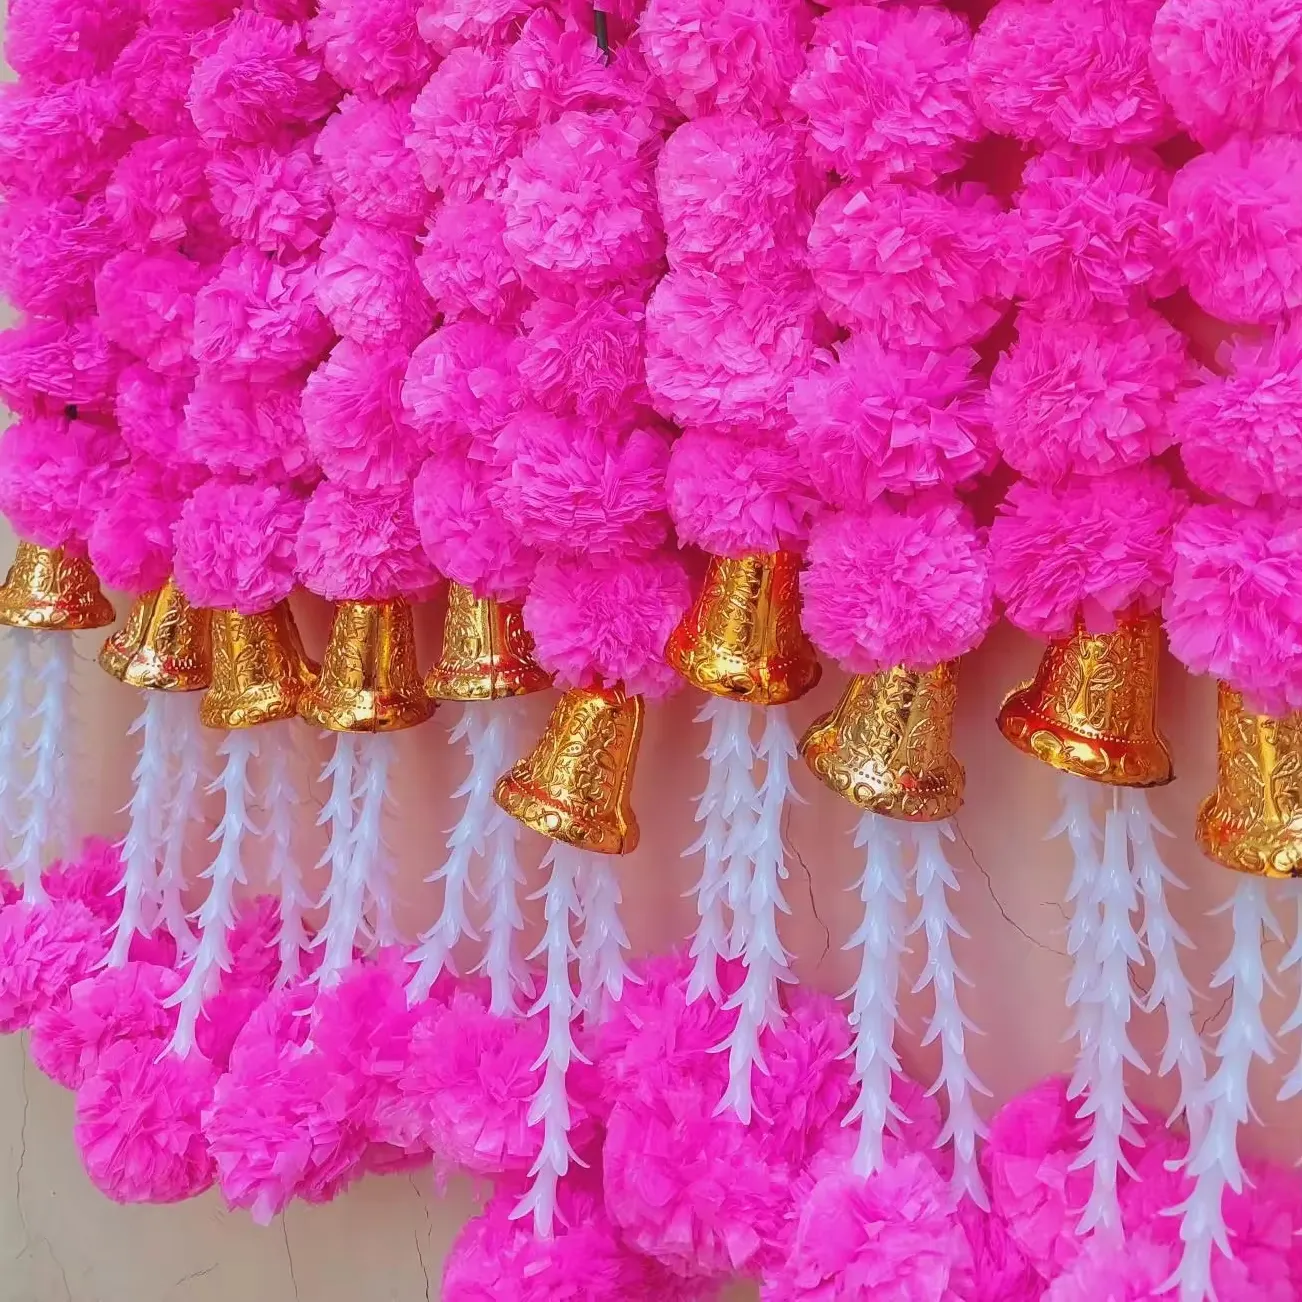 Artificial Marigold Garland Flowers Strings with Tassels and Bell Pink Color Plastic Flowers for Wedding Party Home Decor